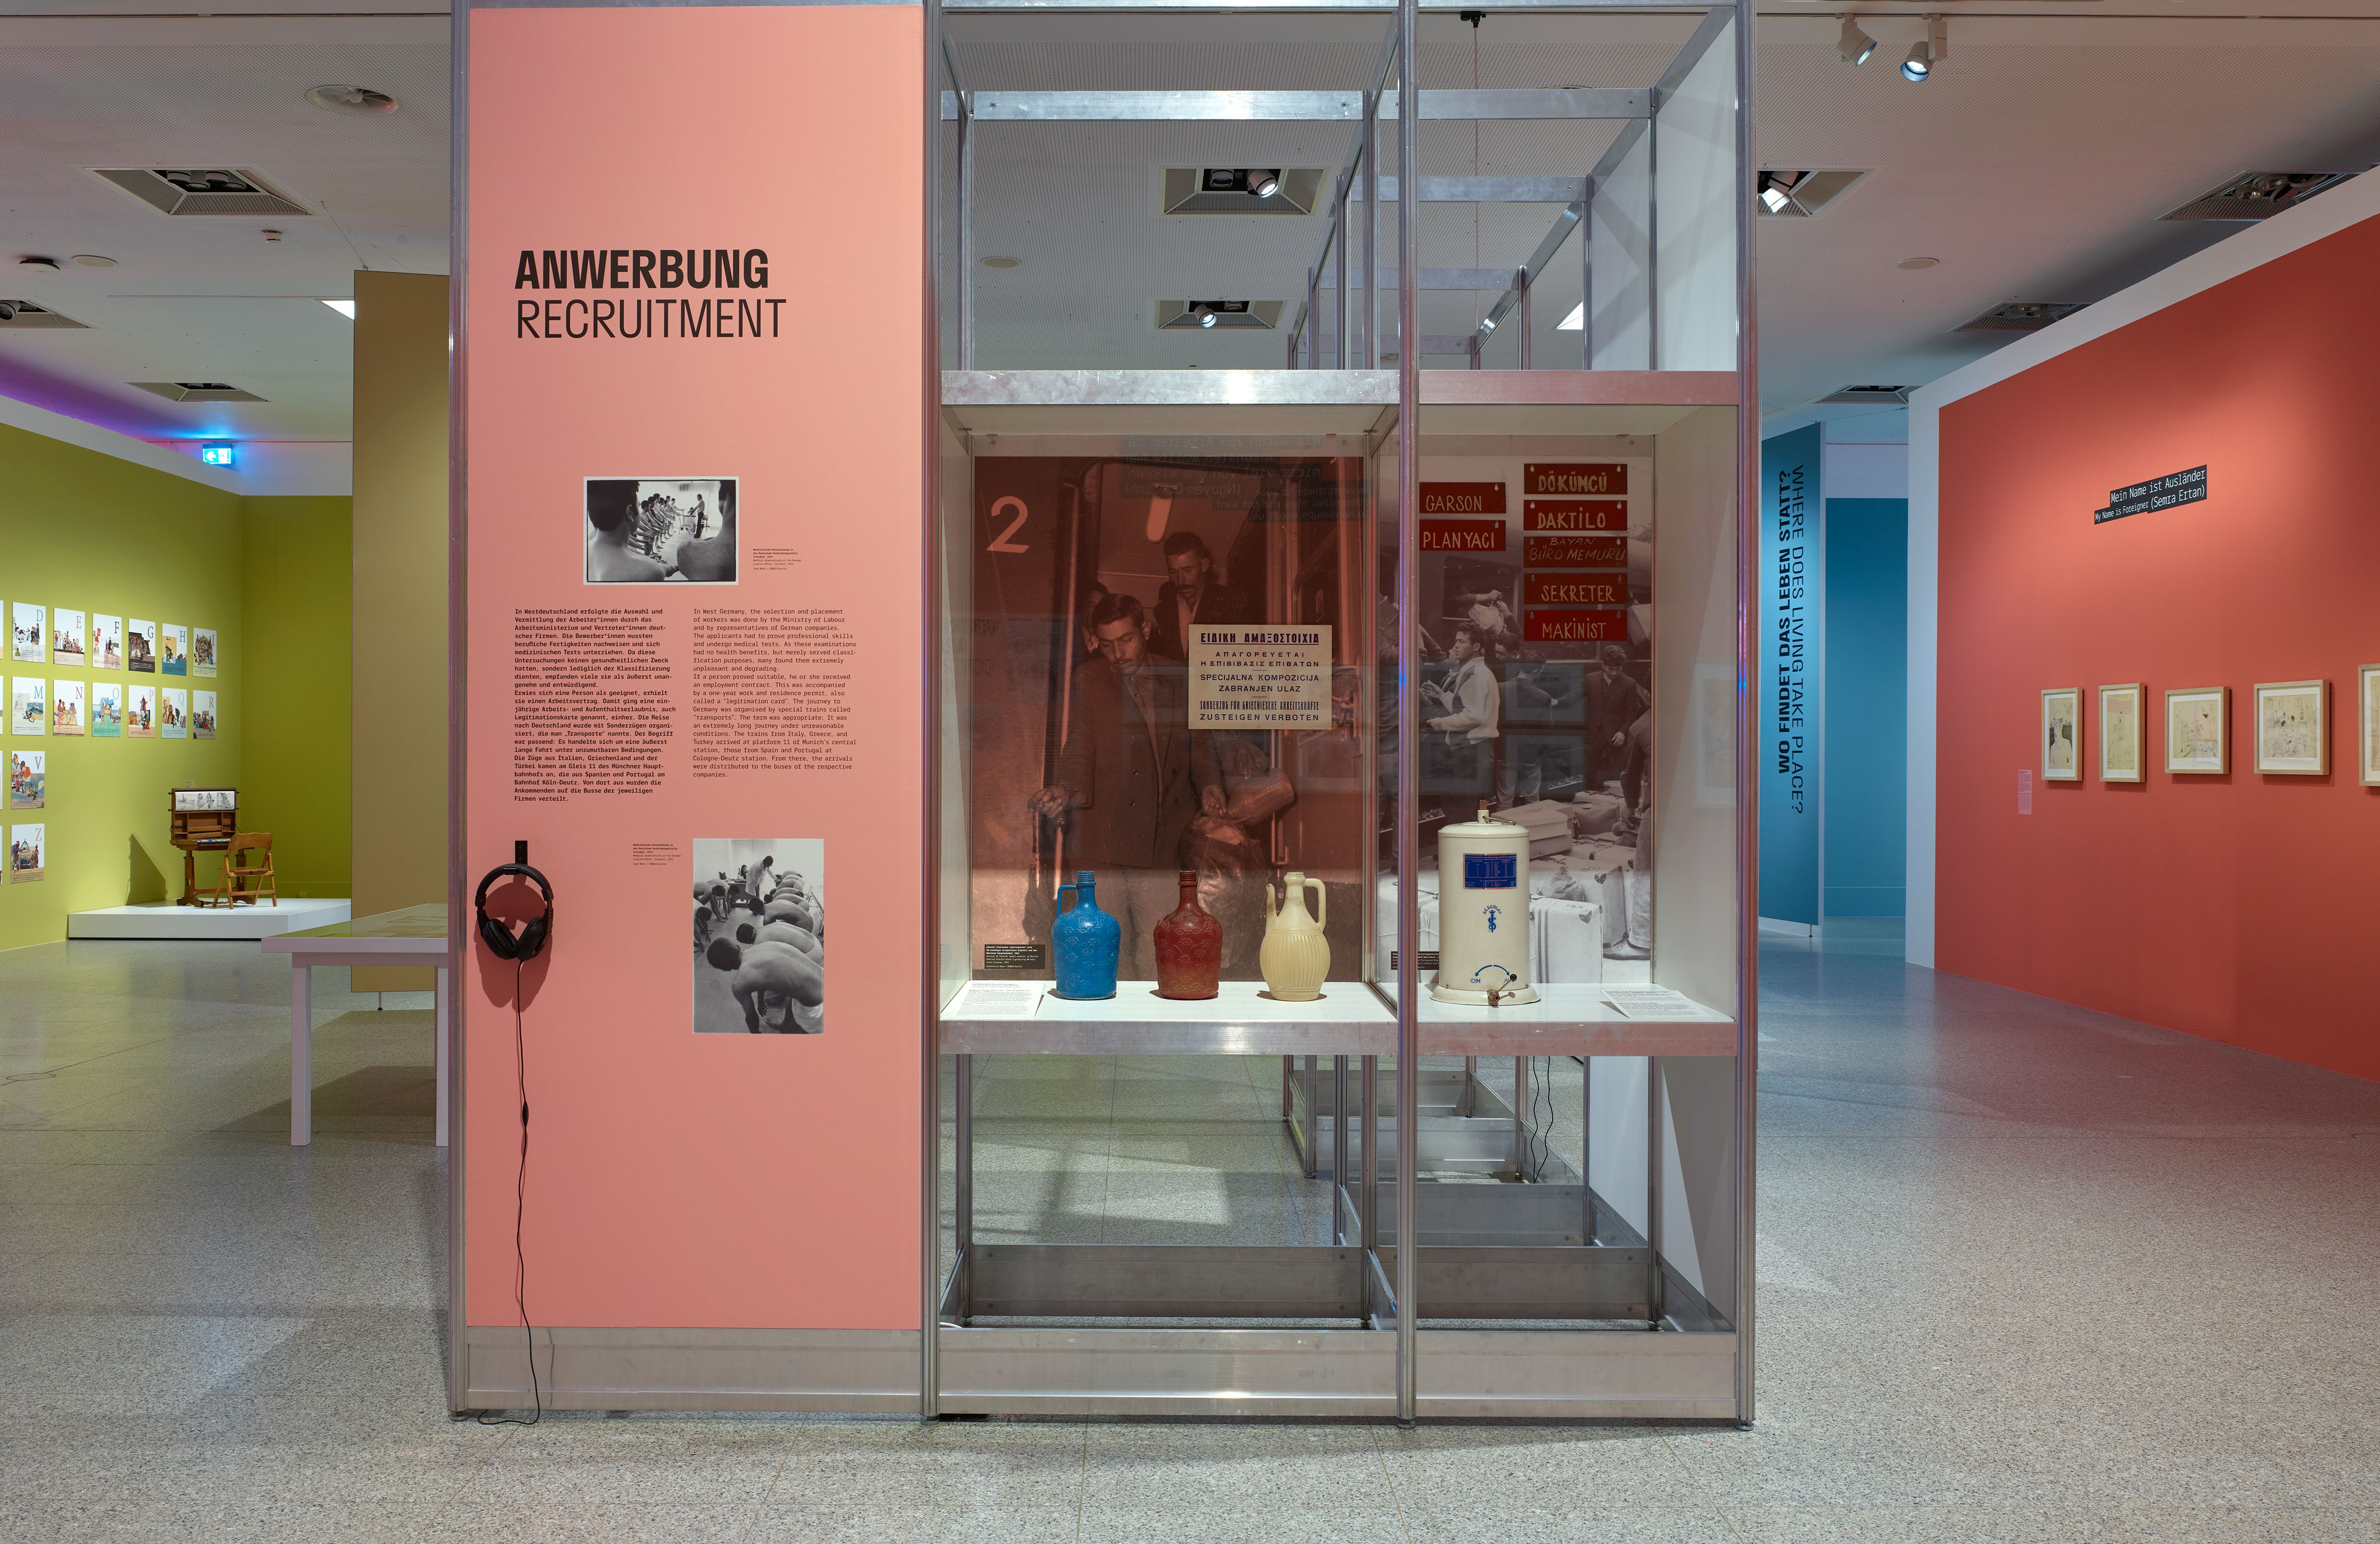 Exhibition view: Objects from the DOMiD collection on the recruitment of migrant workers. Photo: Bundeskunsthalle/Simon Vogel